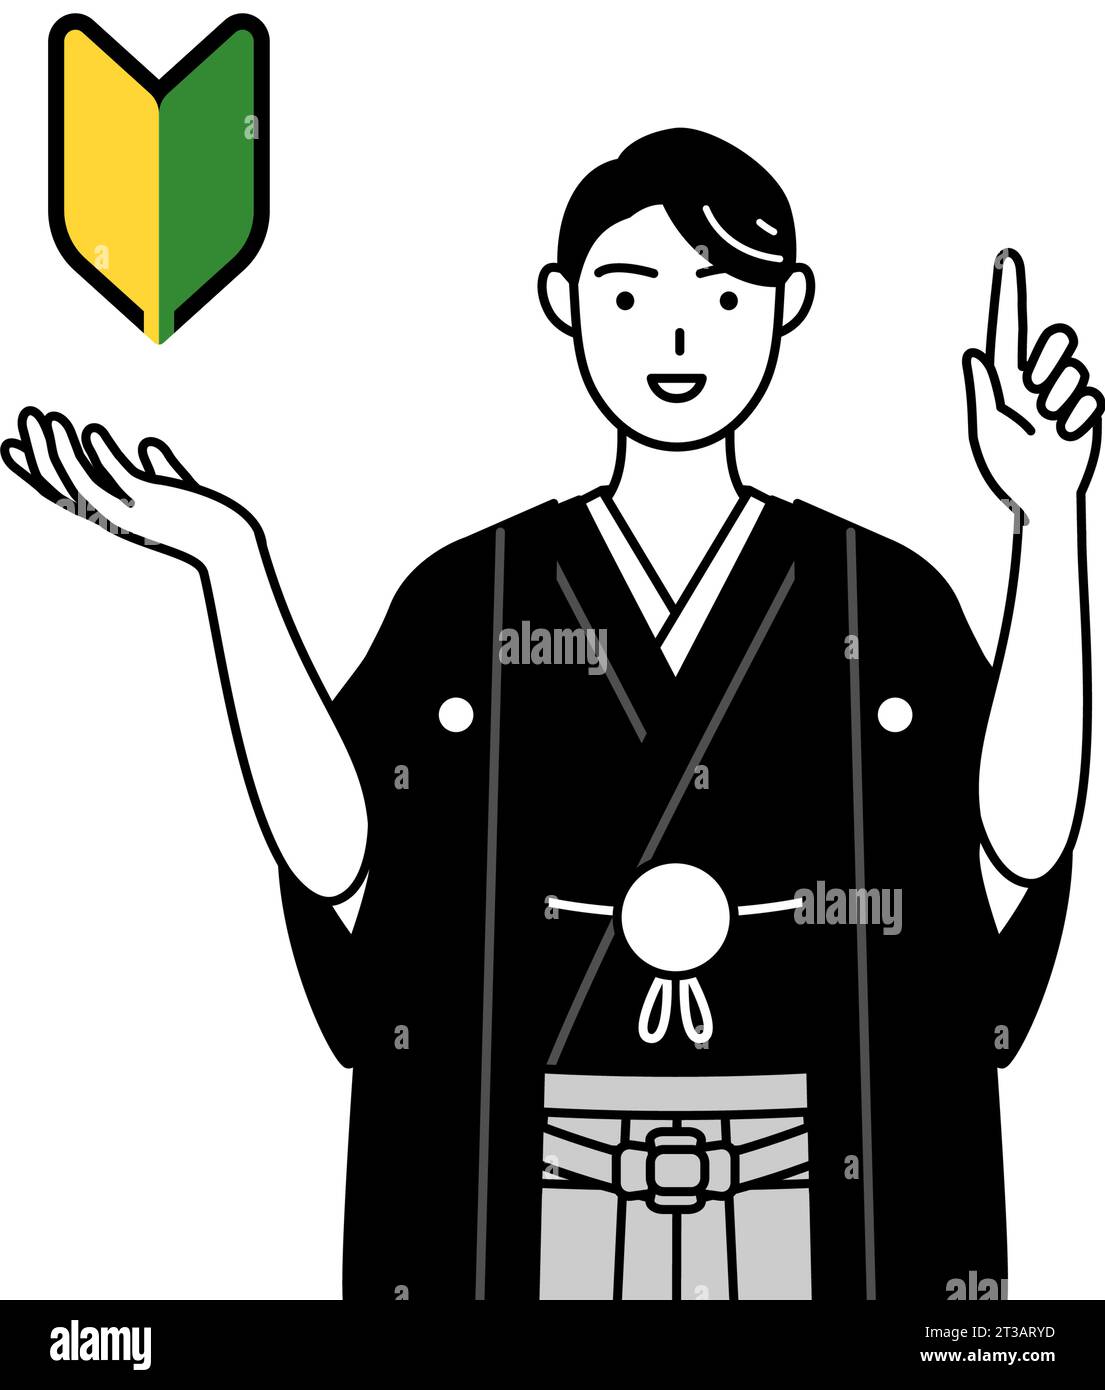 Man wearing Hakama with crest showing the symbol for young leaves ...